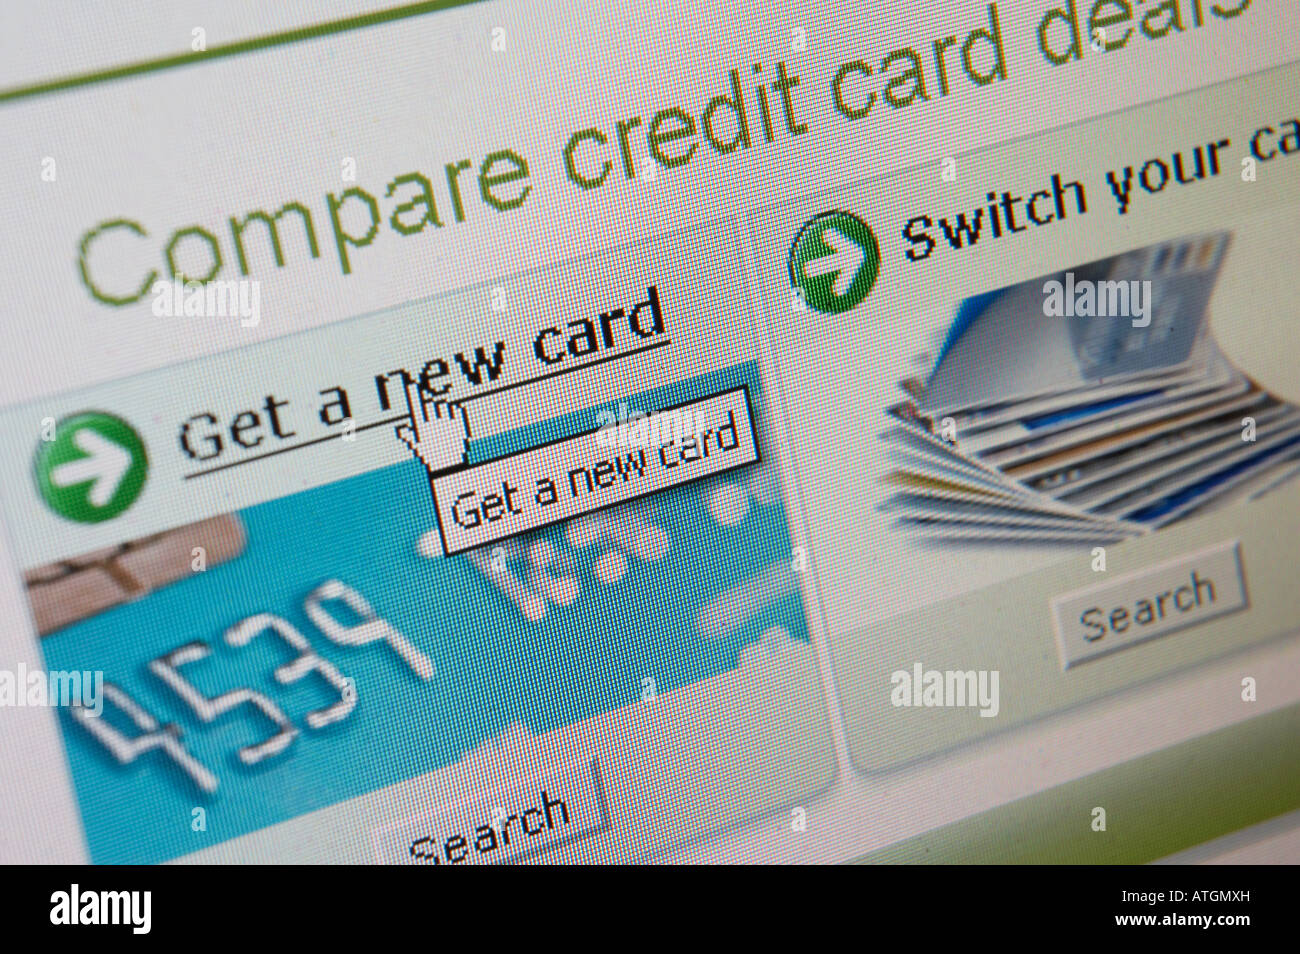 WEB SITE ON COMPUTER SCREEN SHOWING CREDIT CARD COMPARISON Stock Photo